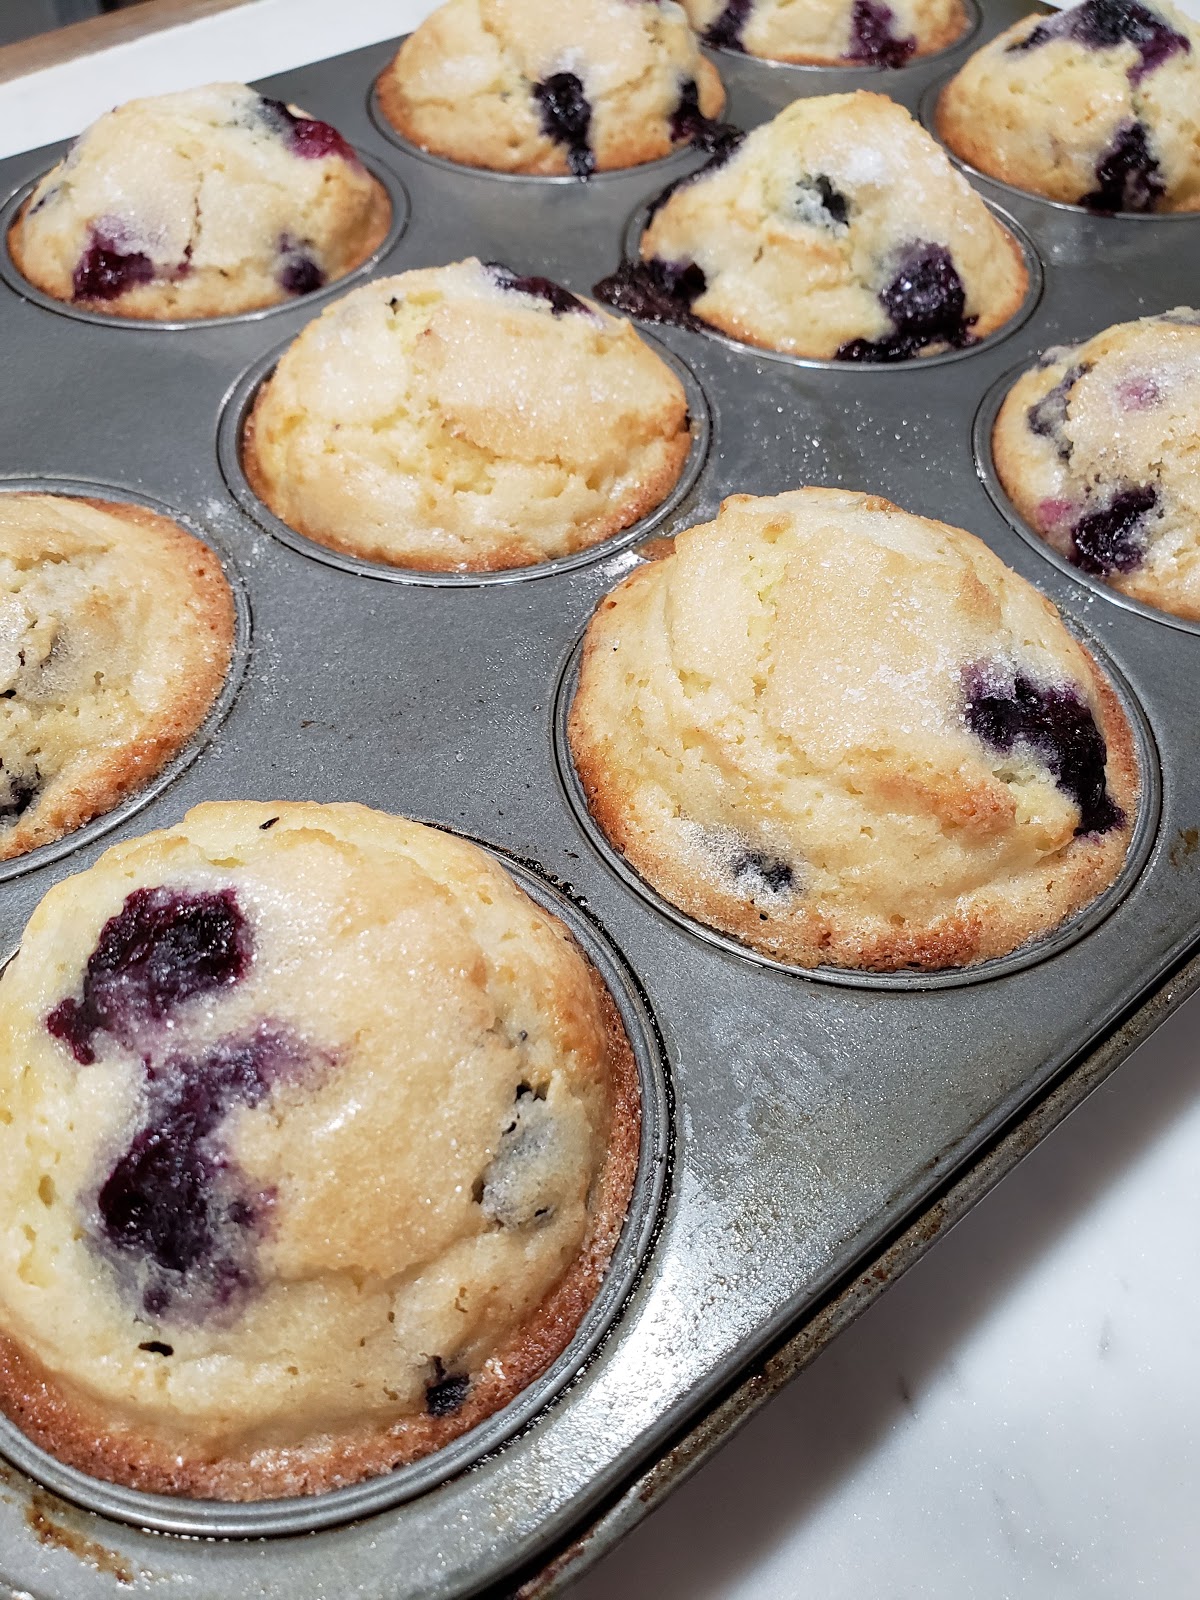 My Patchwork Quilt: FAMOUS DEPARTMENT STORE BLUEBERRY MUFFINS